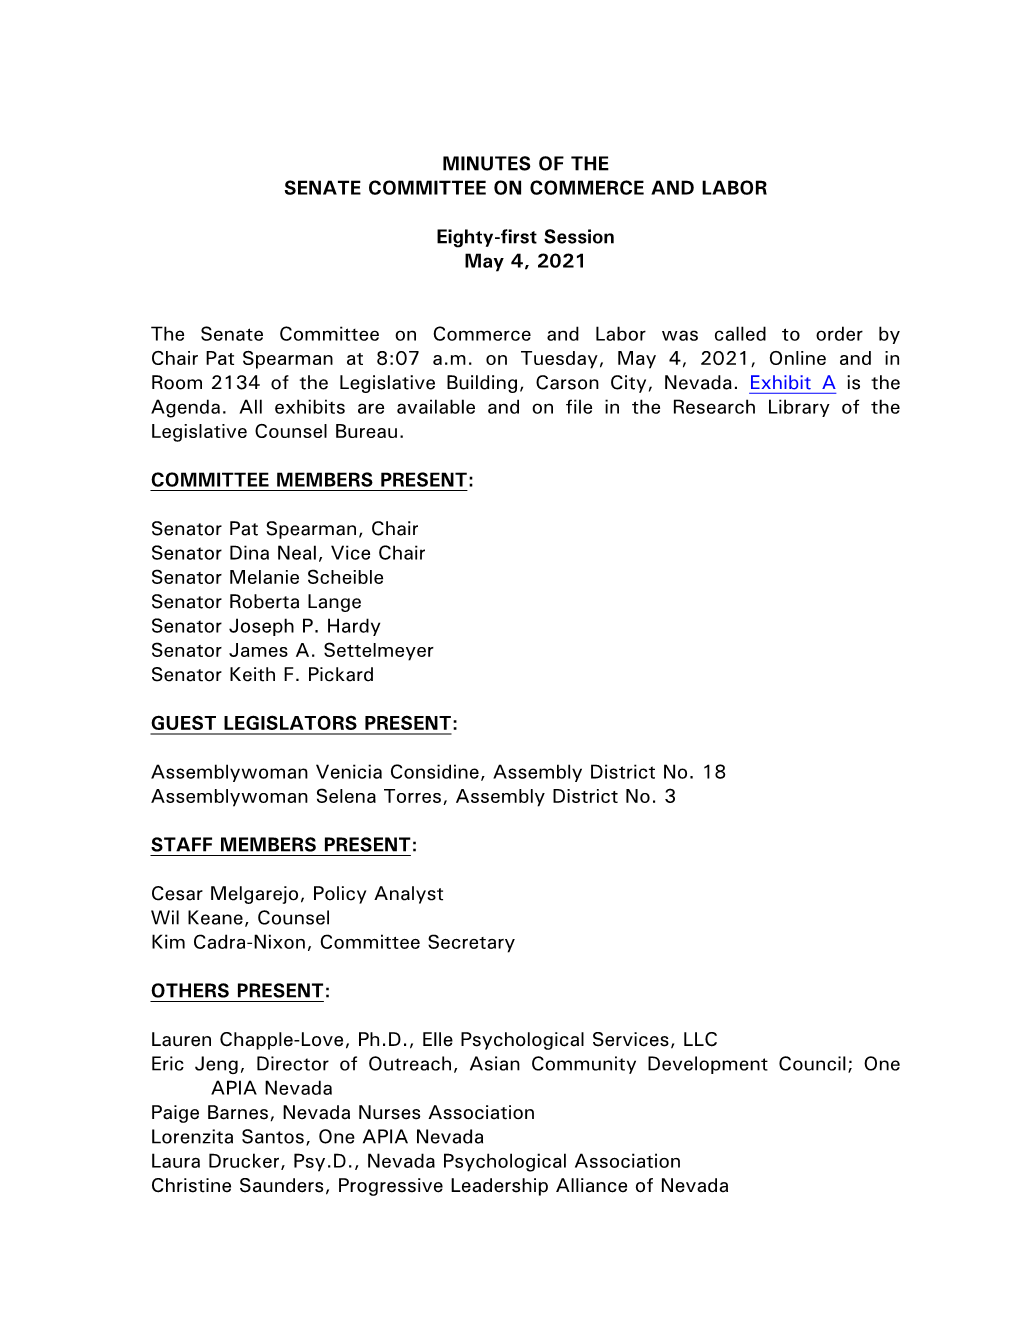 Senate Committee on Commerce and Labor-May 4, 2021